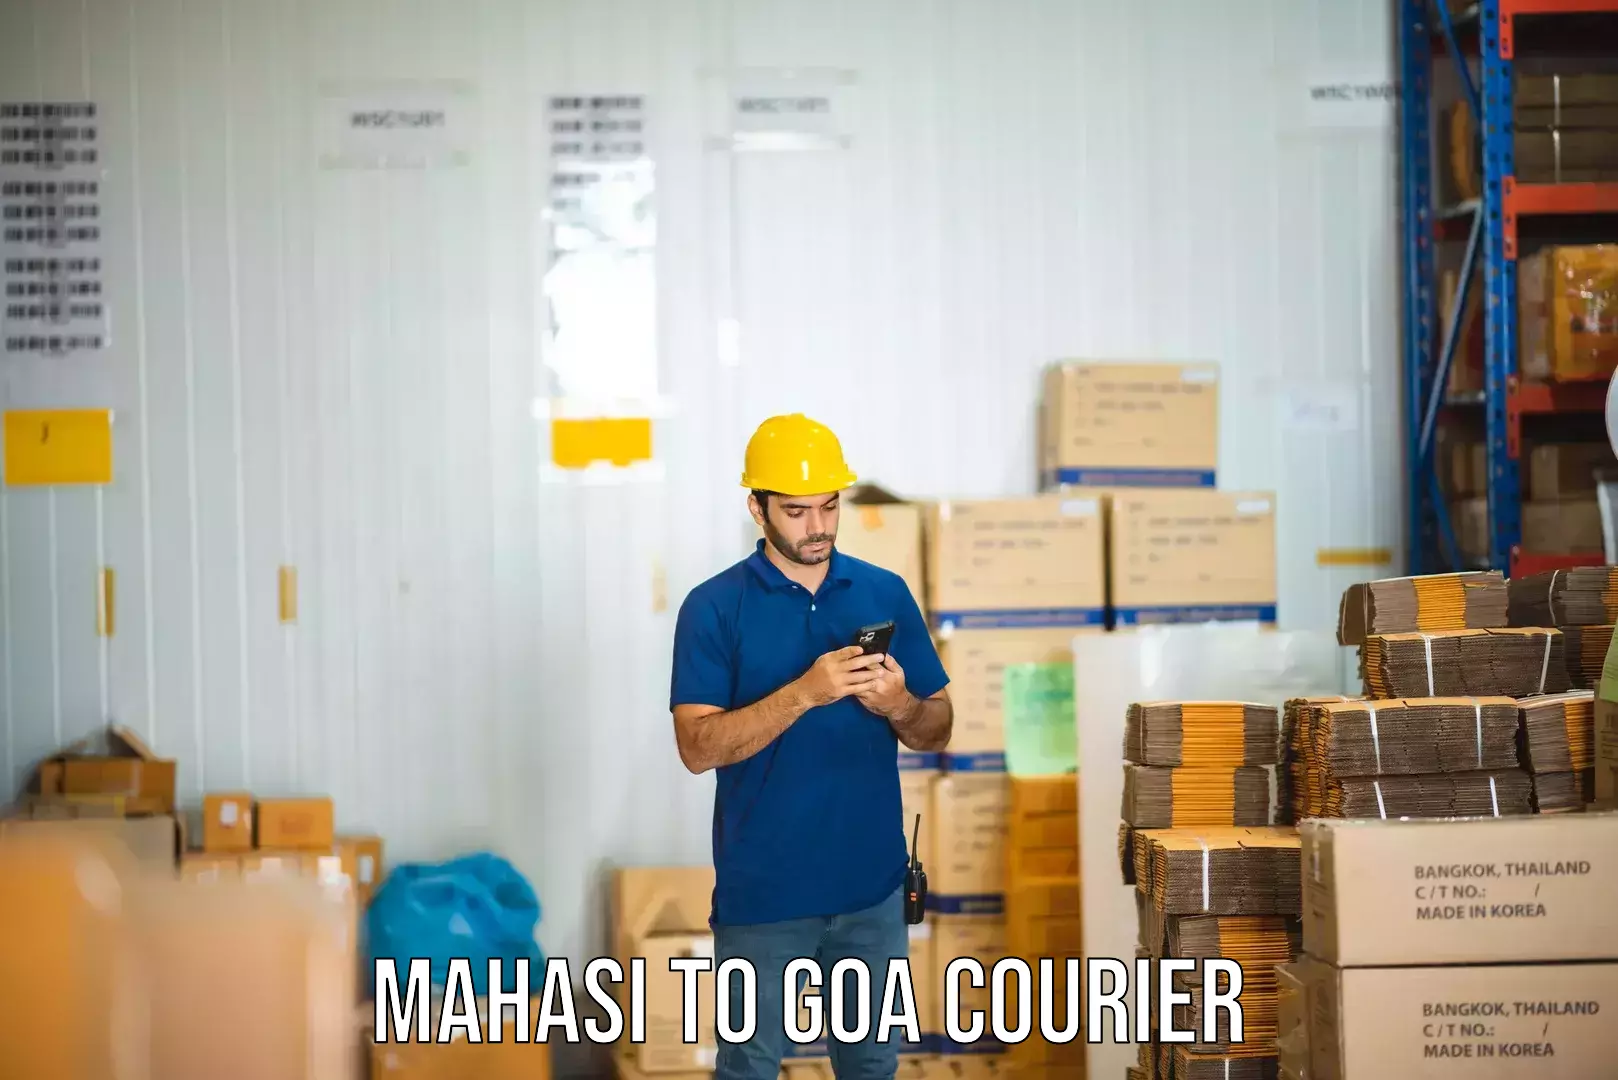 Advanced tracking systems Mahasi to South Goa